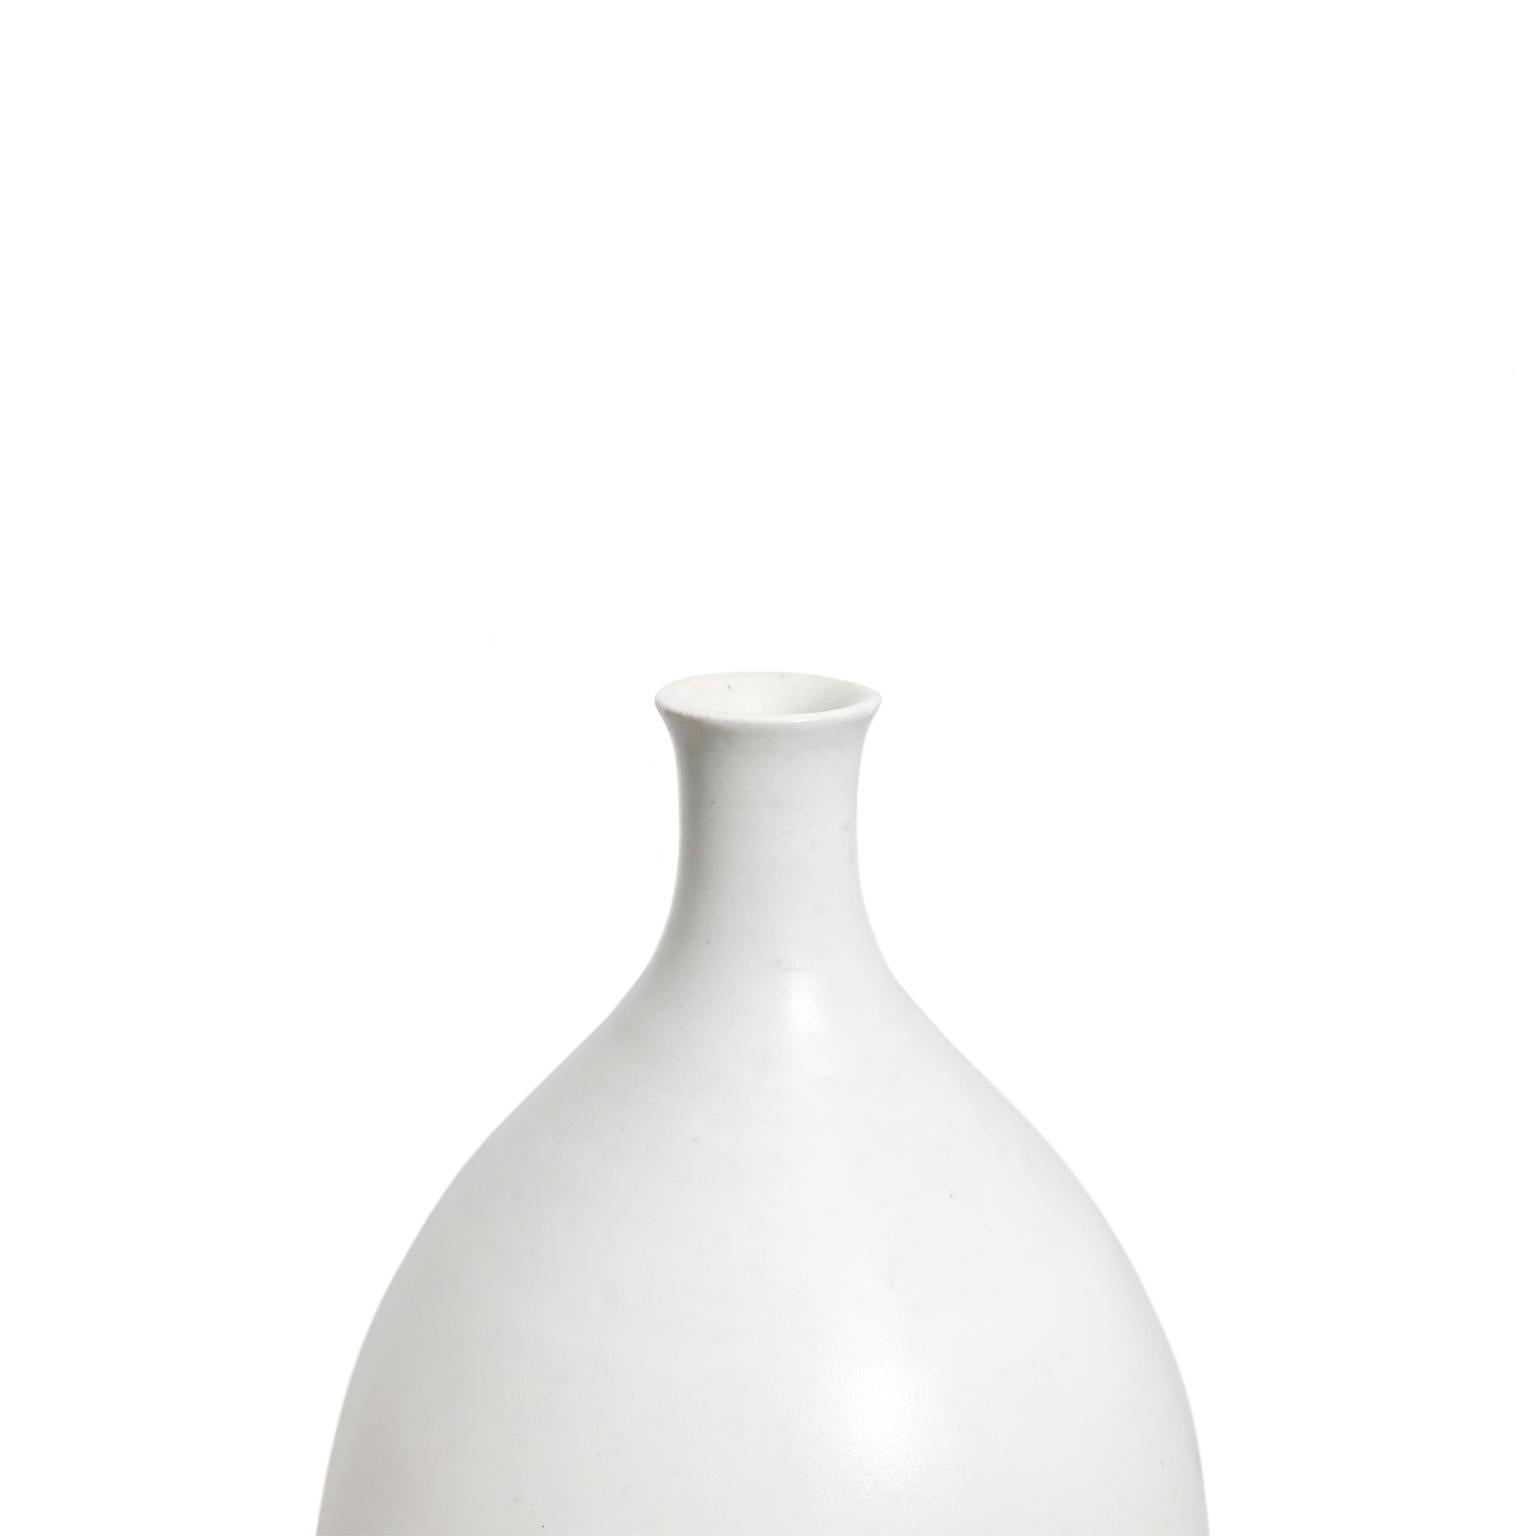 Alabaster glaze ceramic bottle #7 by Sandi Fellman, 2018. 

Veteran photographer Sandi Fellman's ceramic vessels are an exploration of a new medium. The forms, palettes, and sensuality of her photos can be found within each piece. The tactile